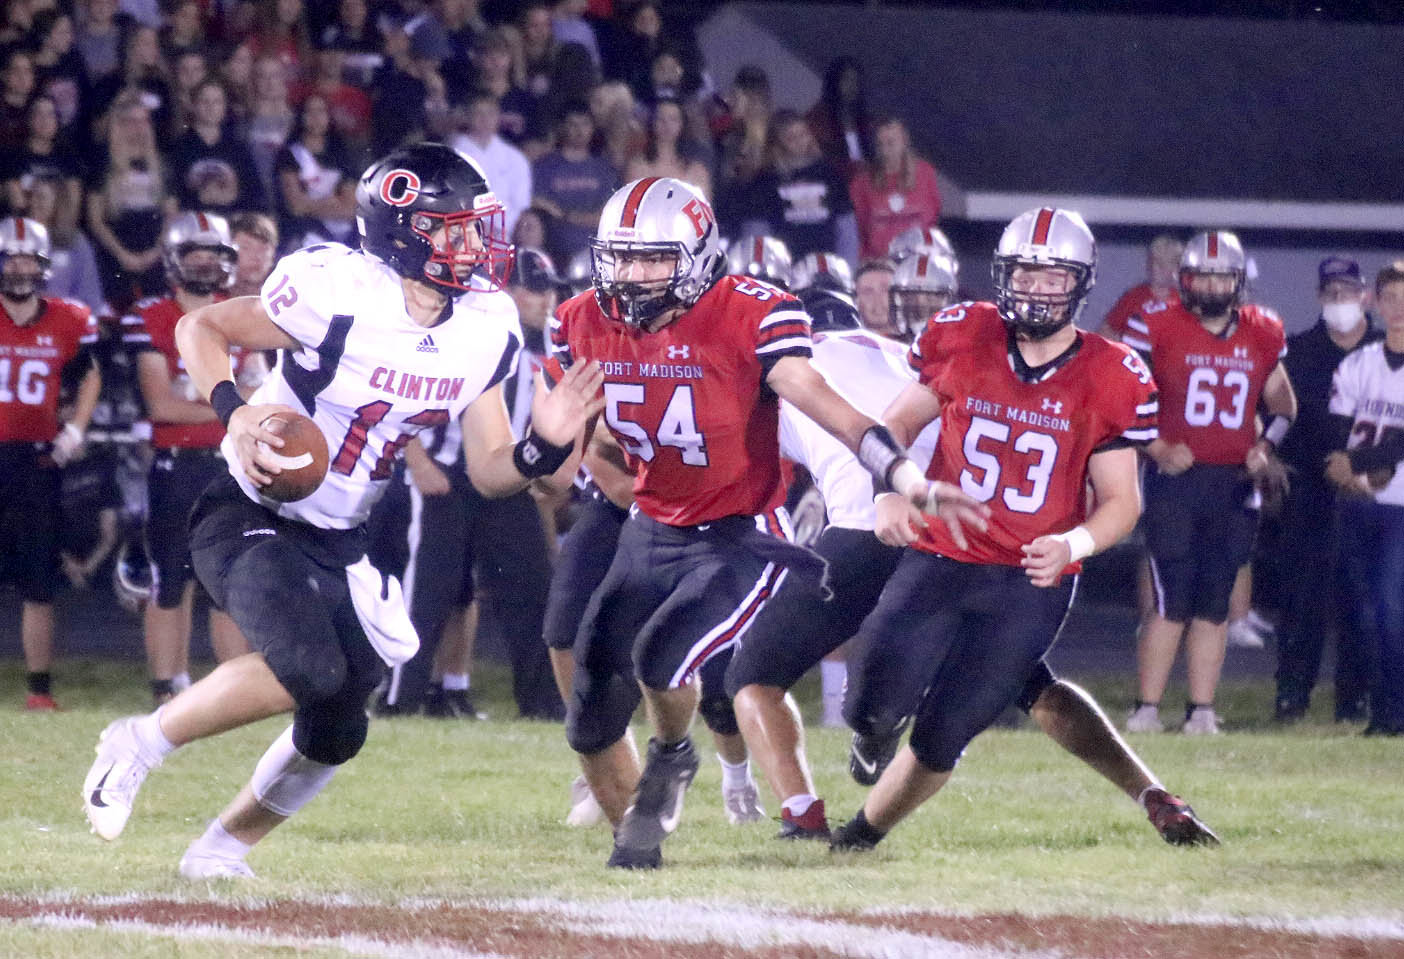 Fort Madison's Austin Ensminger (54) and Daniel Sokolik (53) chase down Clinton QB Jai Jensen in the first quarter of Friday's 58-14 win over Clinton. Photo by Chuck Vandenberg/PCC